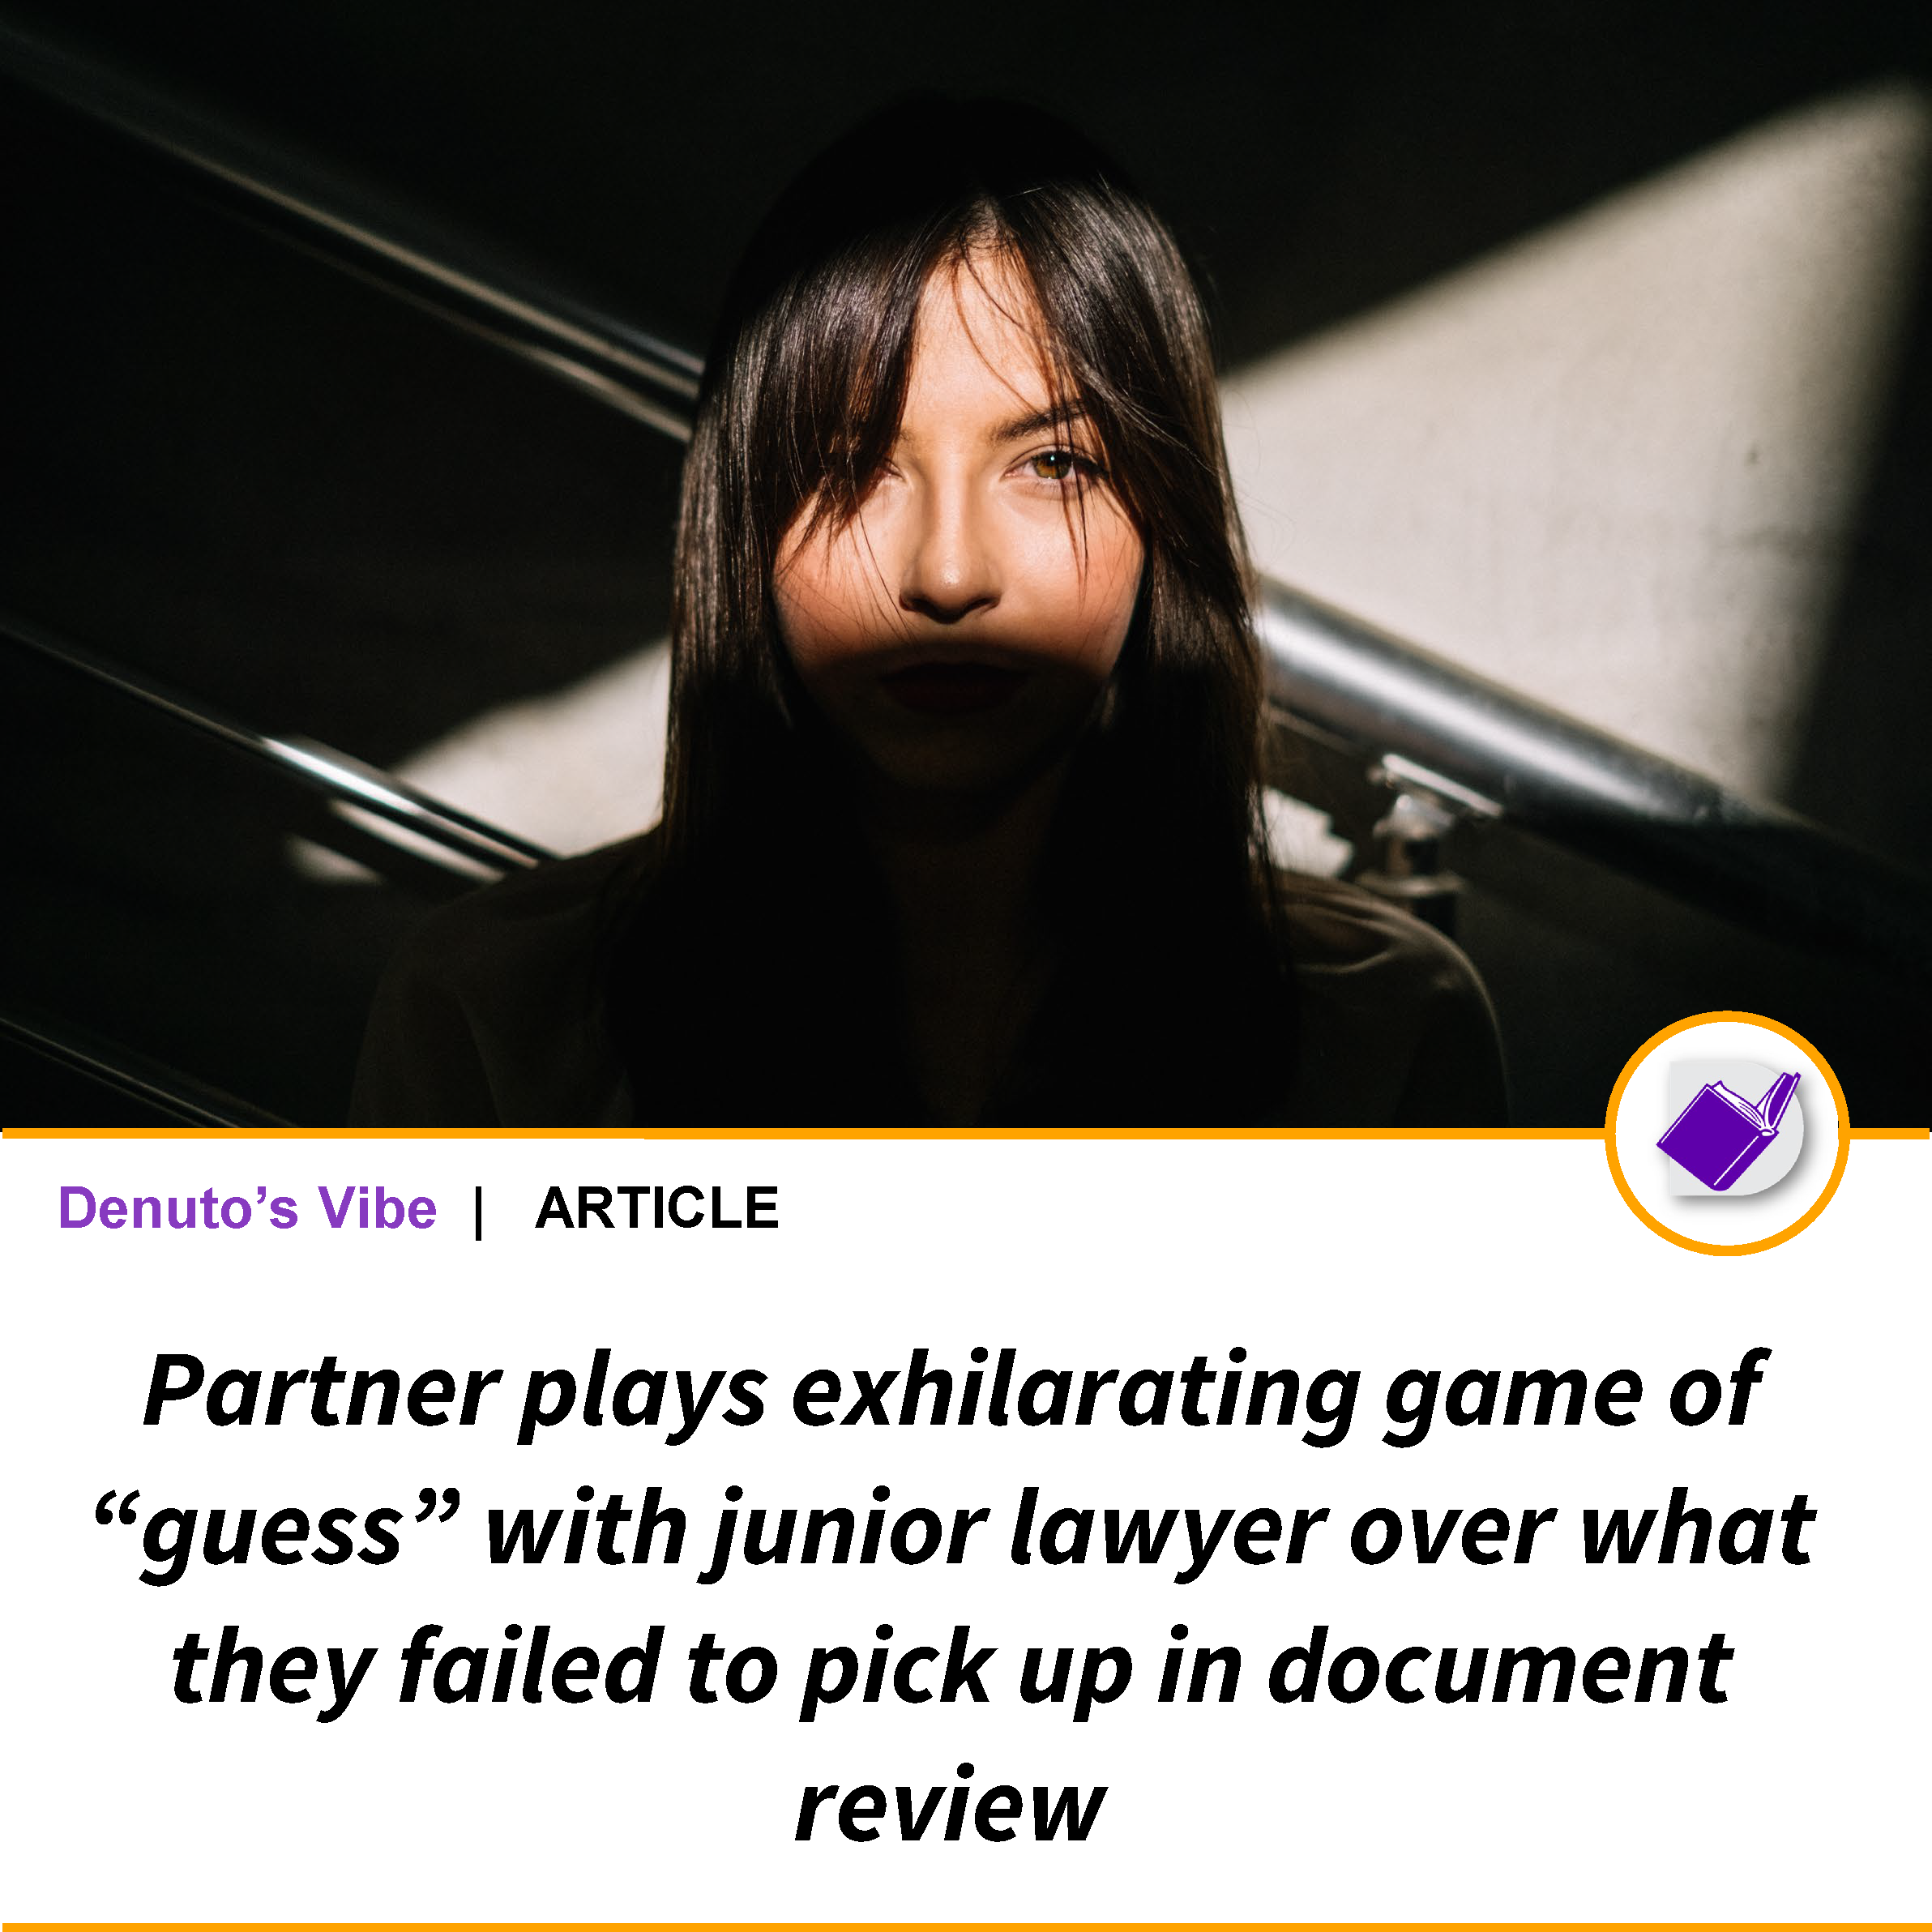 Partner plays exhilarating game of “guess” with junior lawyer over what they failed to pick up in document review.png